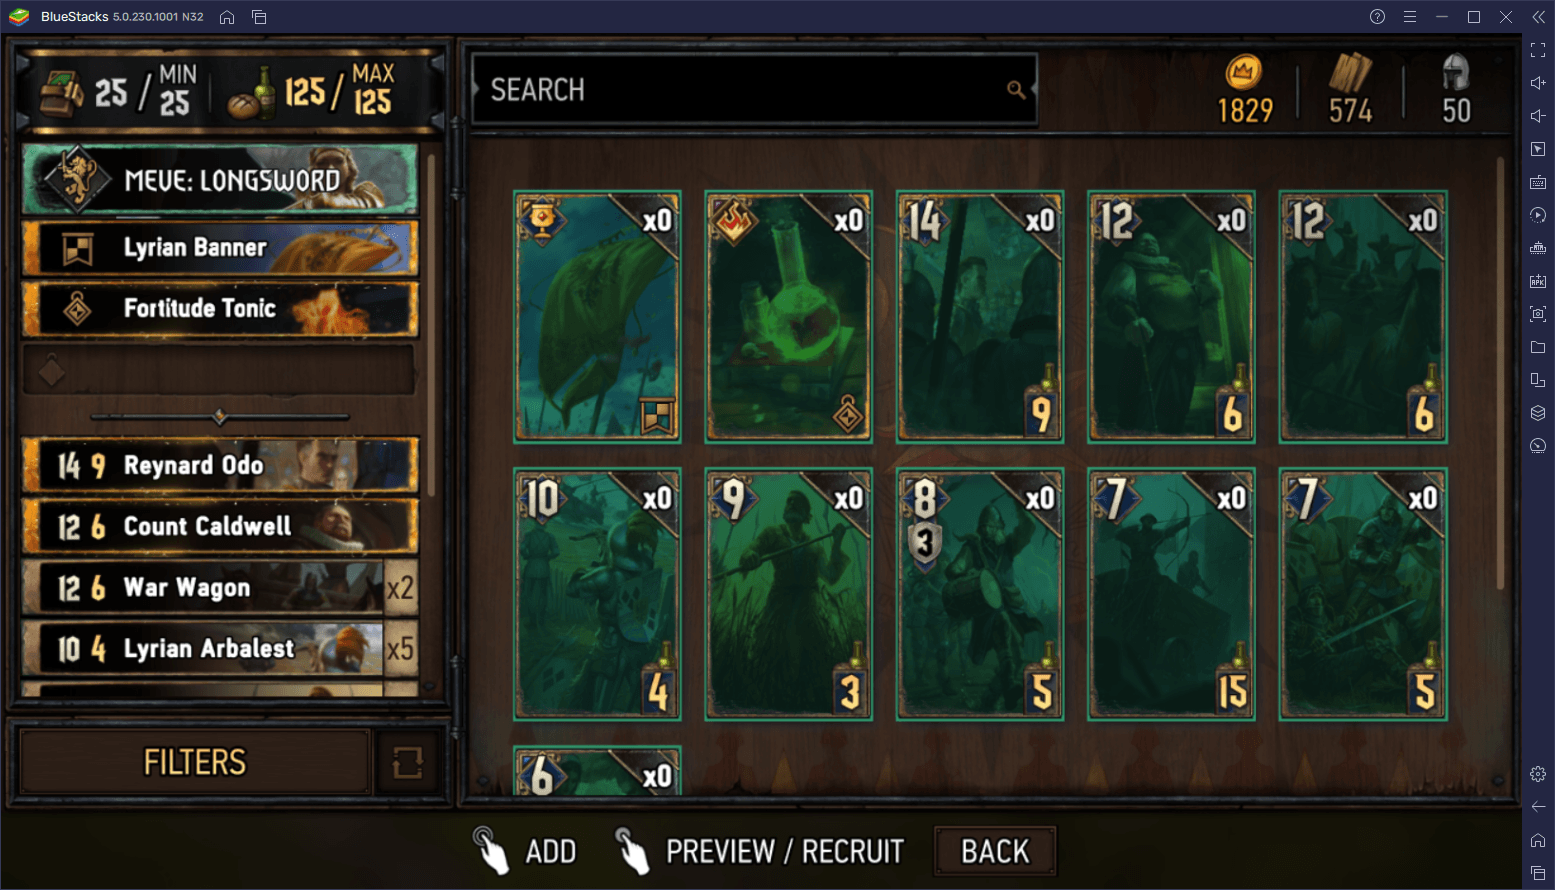 Beginner’s Guide for The Witcher Tales: Thronebreaker - Acquainting Yourself With the Gameplay and UI